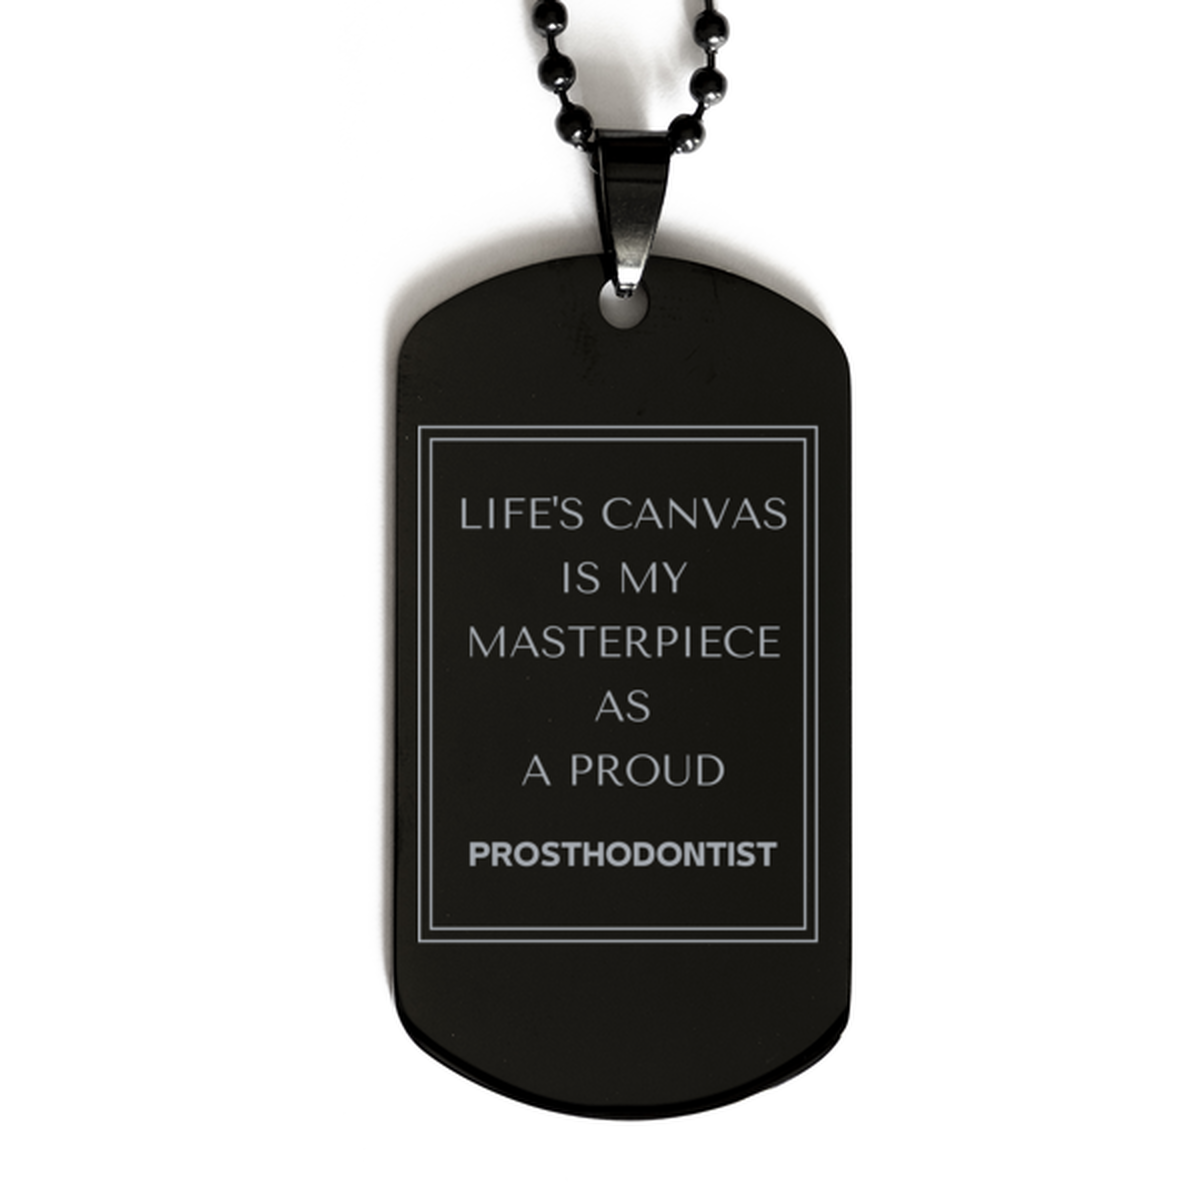 Proud Prosthodontist Gifts, Life's canvas is my masterpiece, Epic Birthday Christmas Unique Black Dog Tag For Prosthodontist, Coworkers, Men, Women, Friends